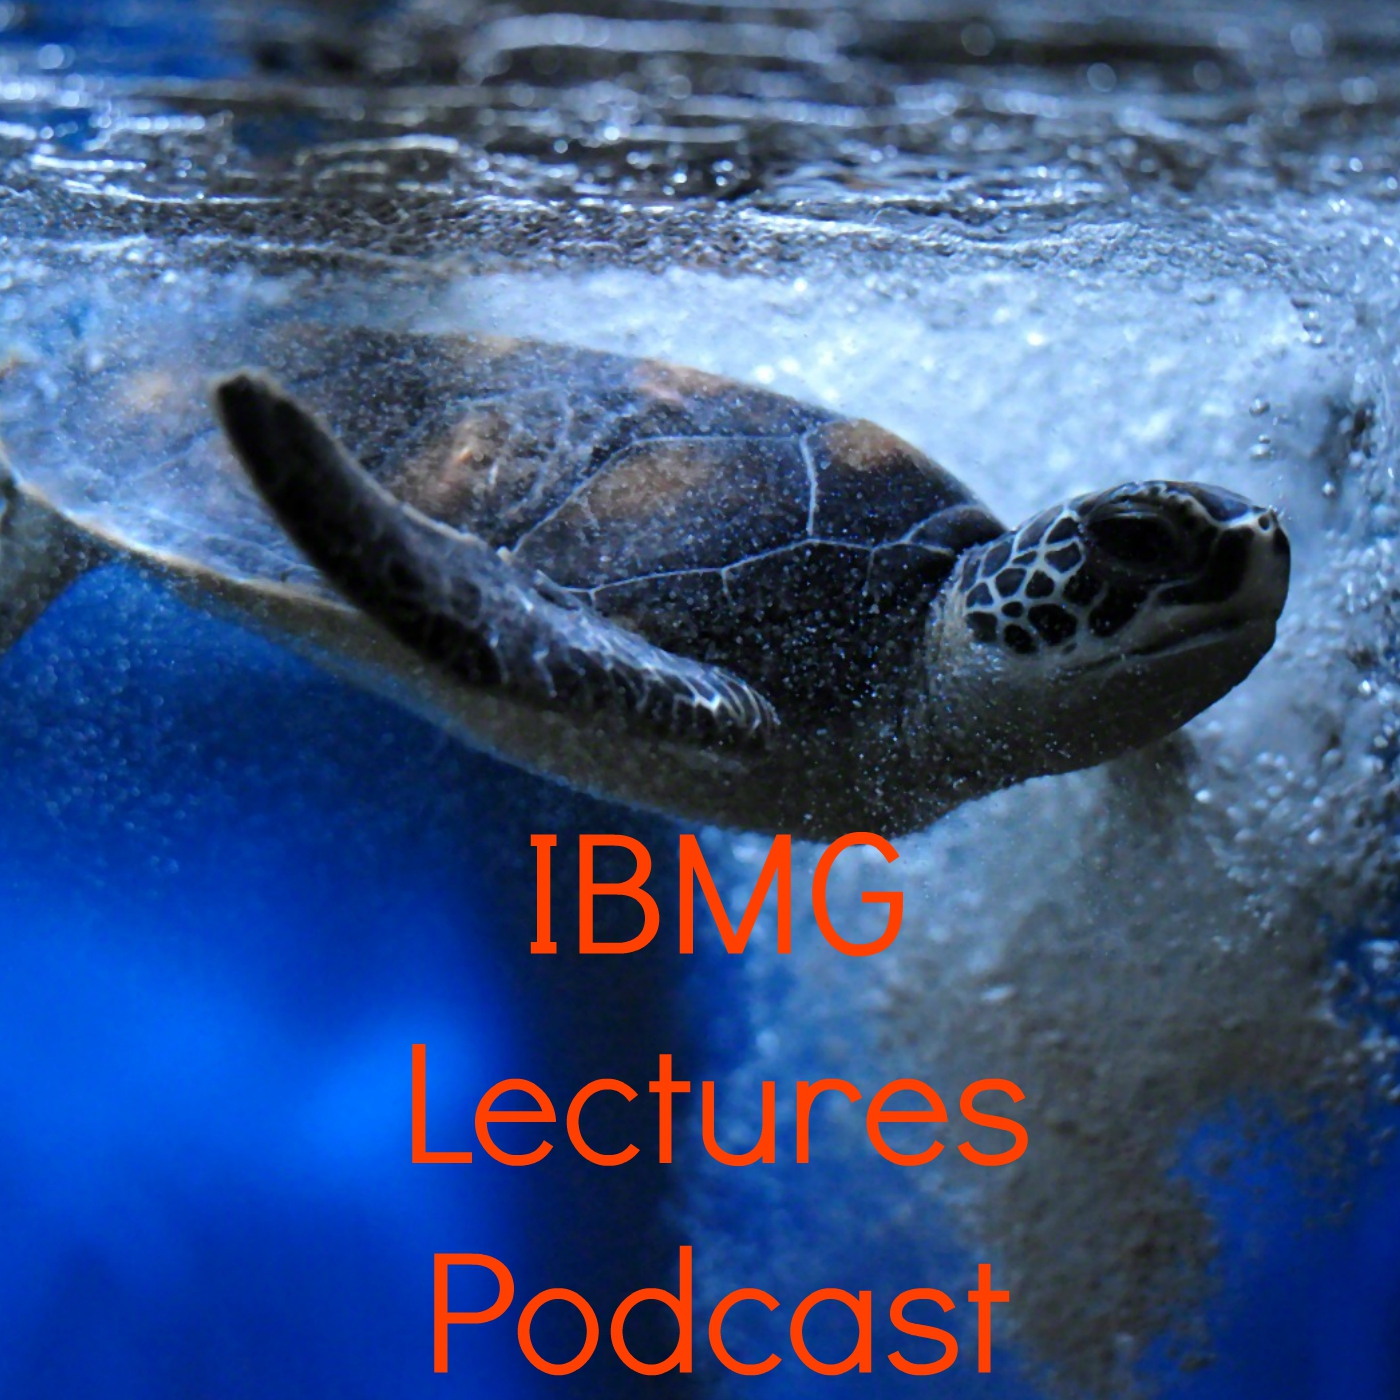 IBMG Lectures Podcast